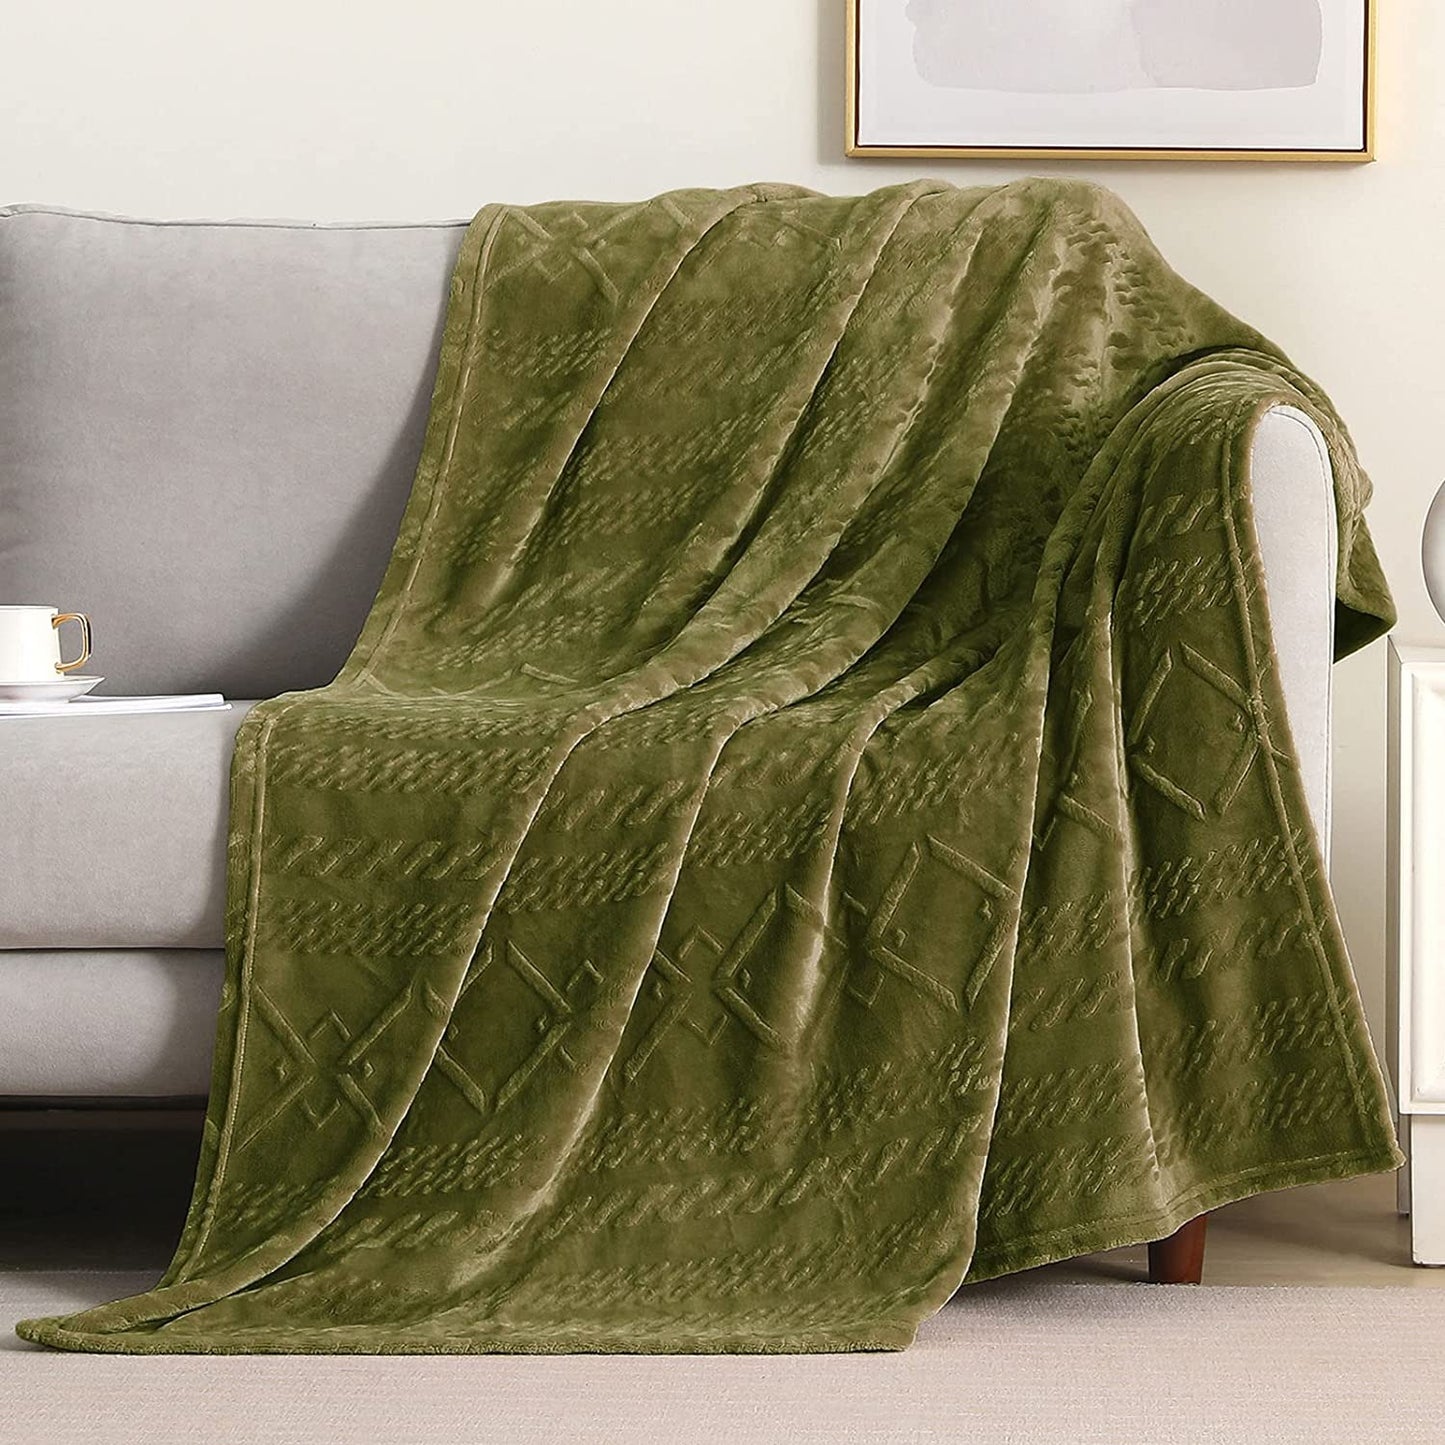 Exclusivo Mezcla Soft Throw Blanket, Large Fuzzy Fleece Blanket, Decorative Geometry Pattern Plush Throw Blanket for Couch/Sofa/Bed, 50x60 Inches, Green